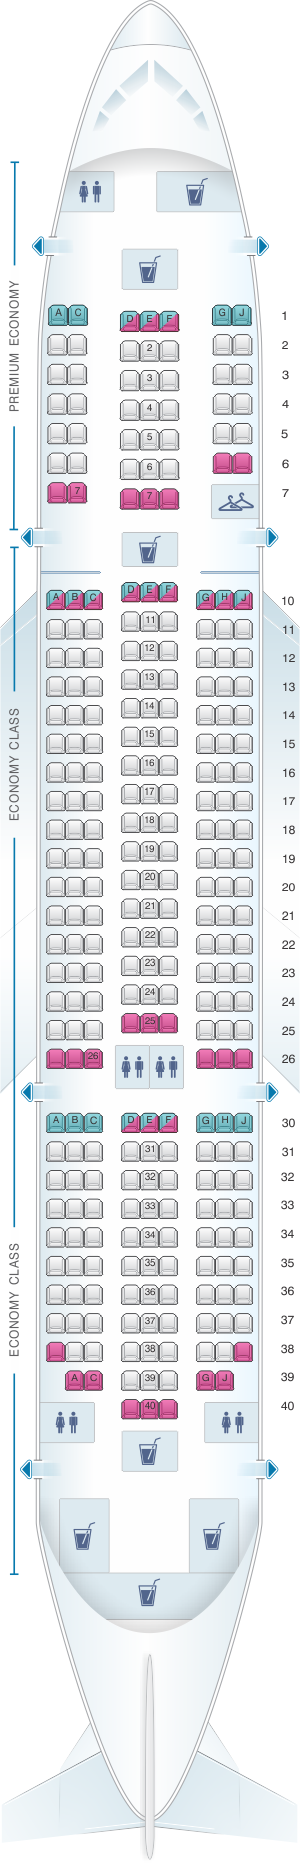 Seat map for TUI Boeing B787 Dreamliner